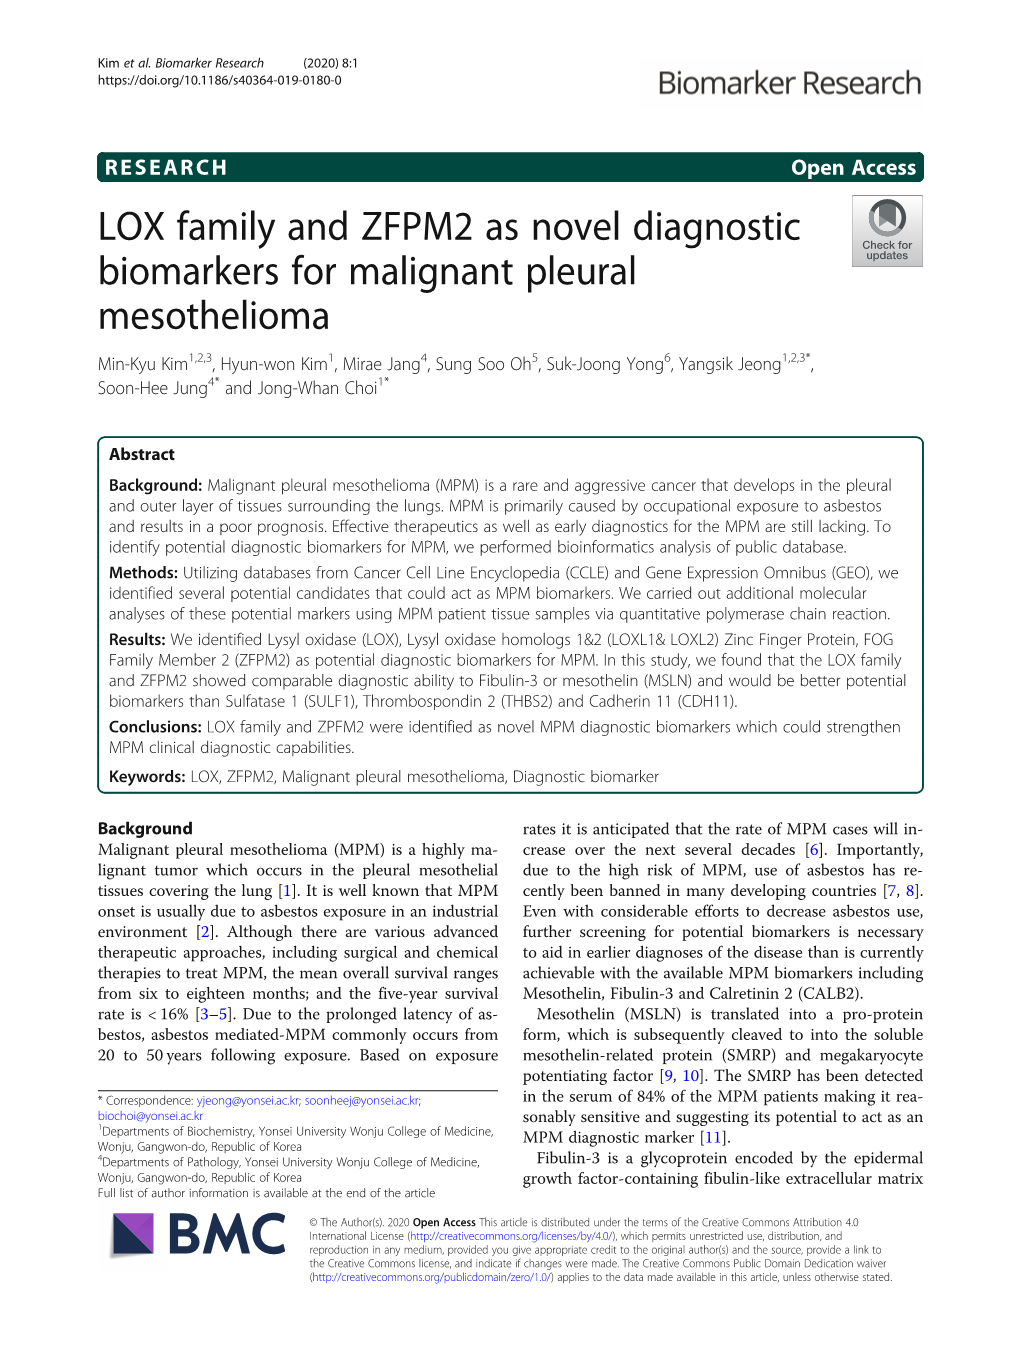 LOX Family and ZFPM2 As Novel Diagnostic Biomarkers for Malignant